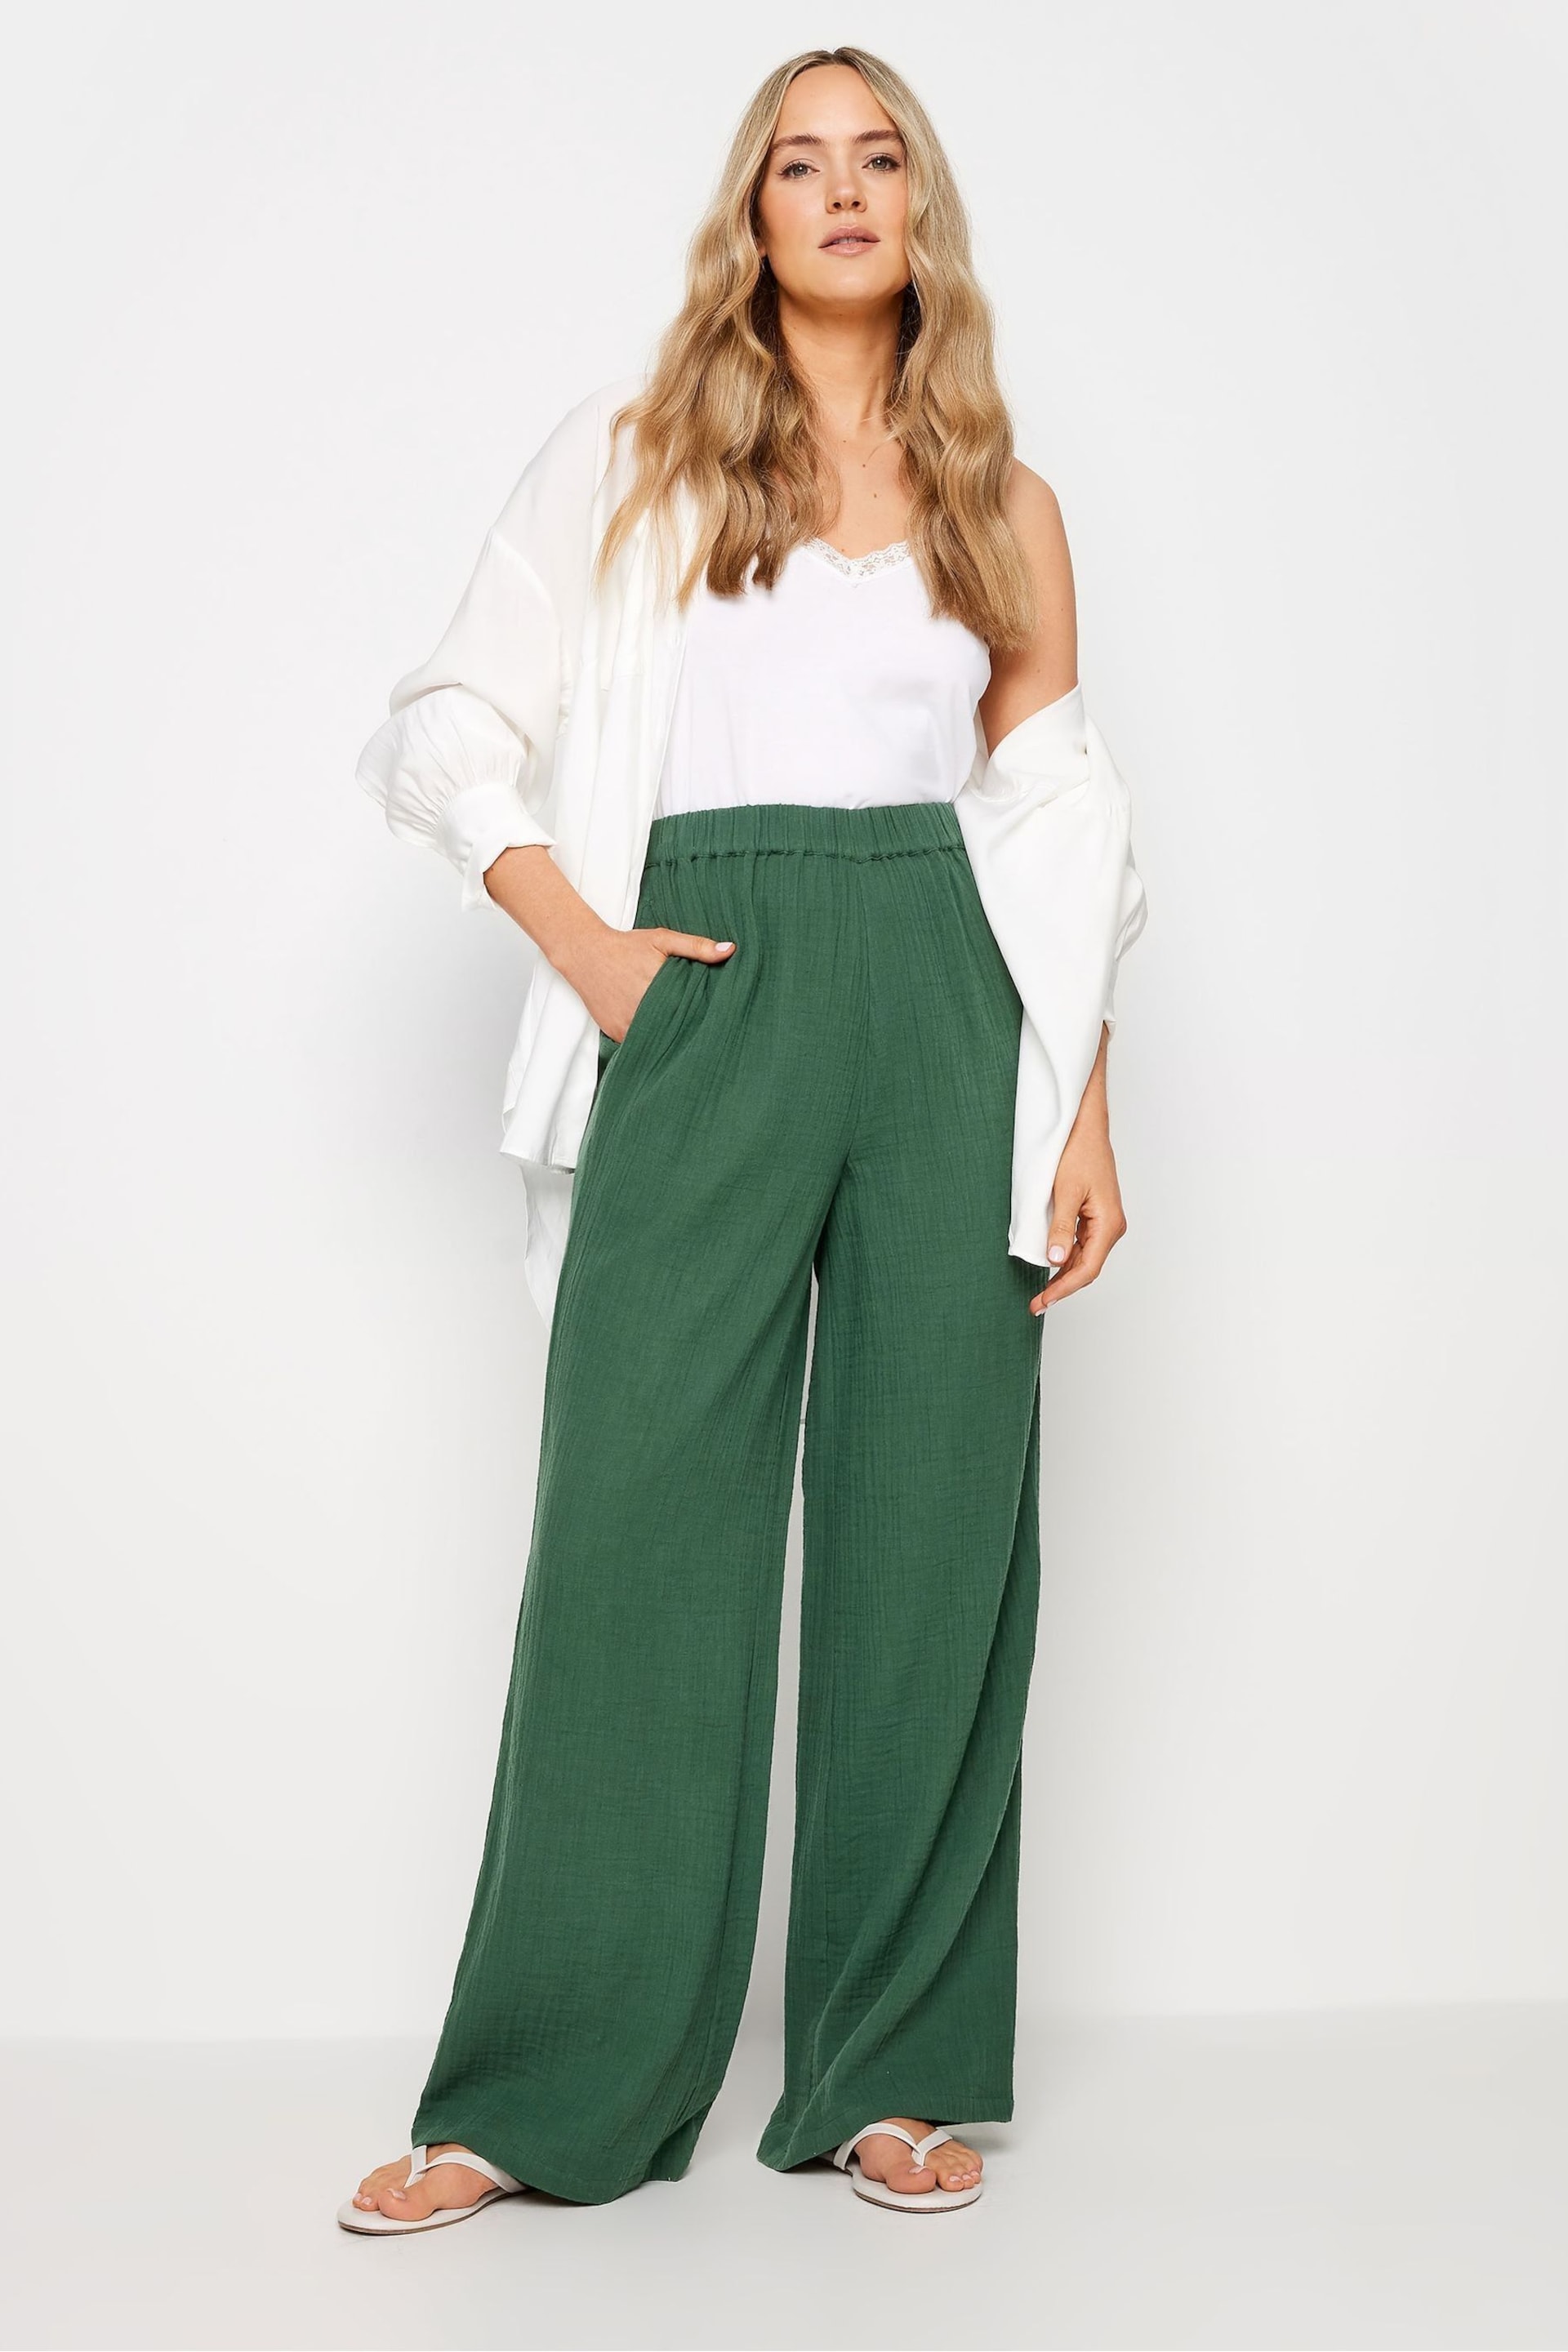 Long Tall Sally Green Wide Leg Trousers - Image 3 of 5